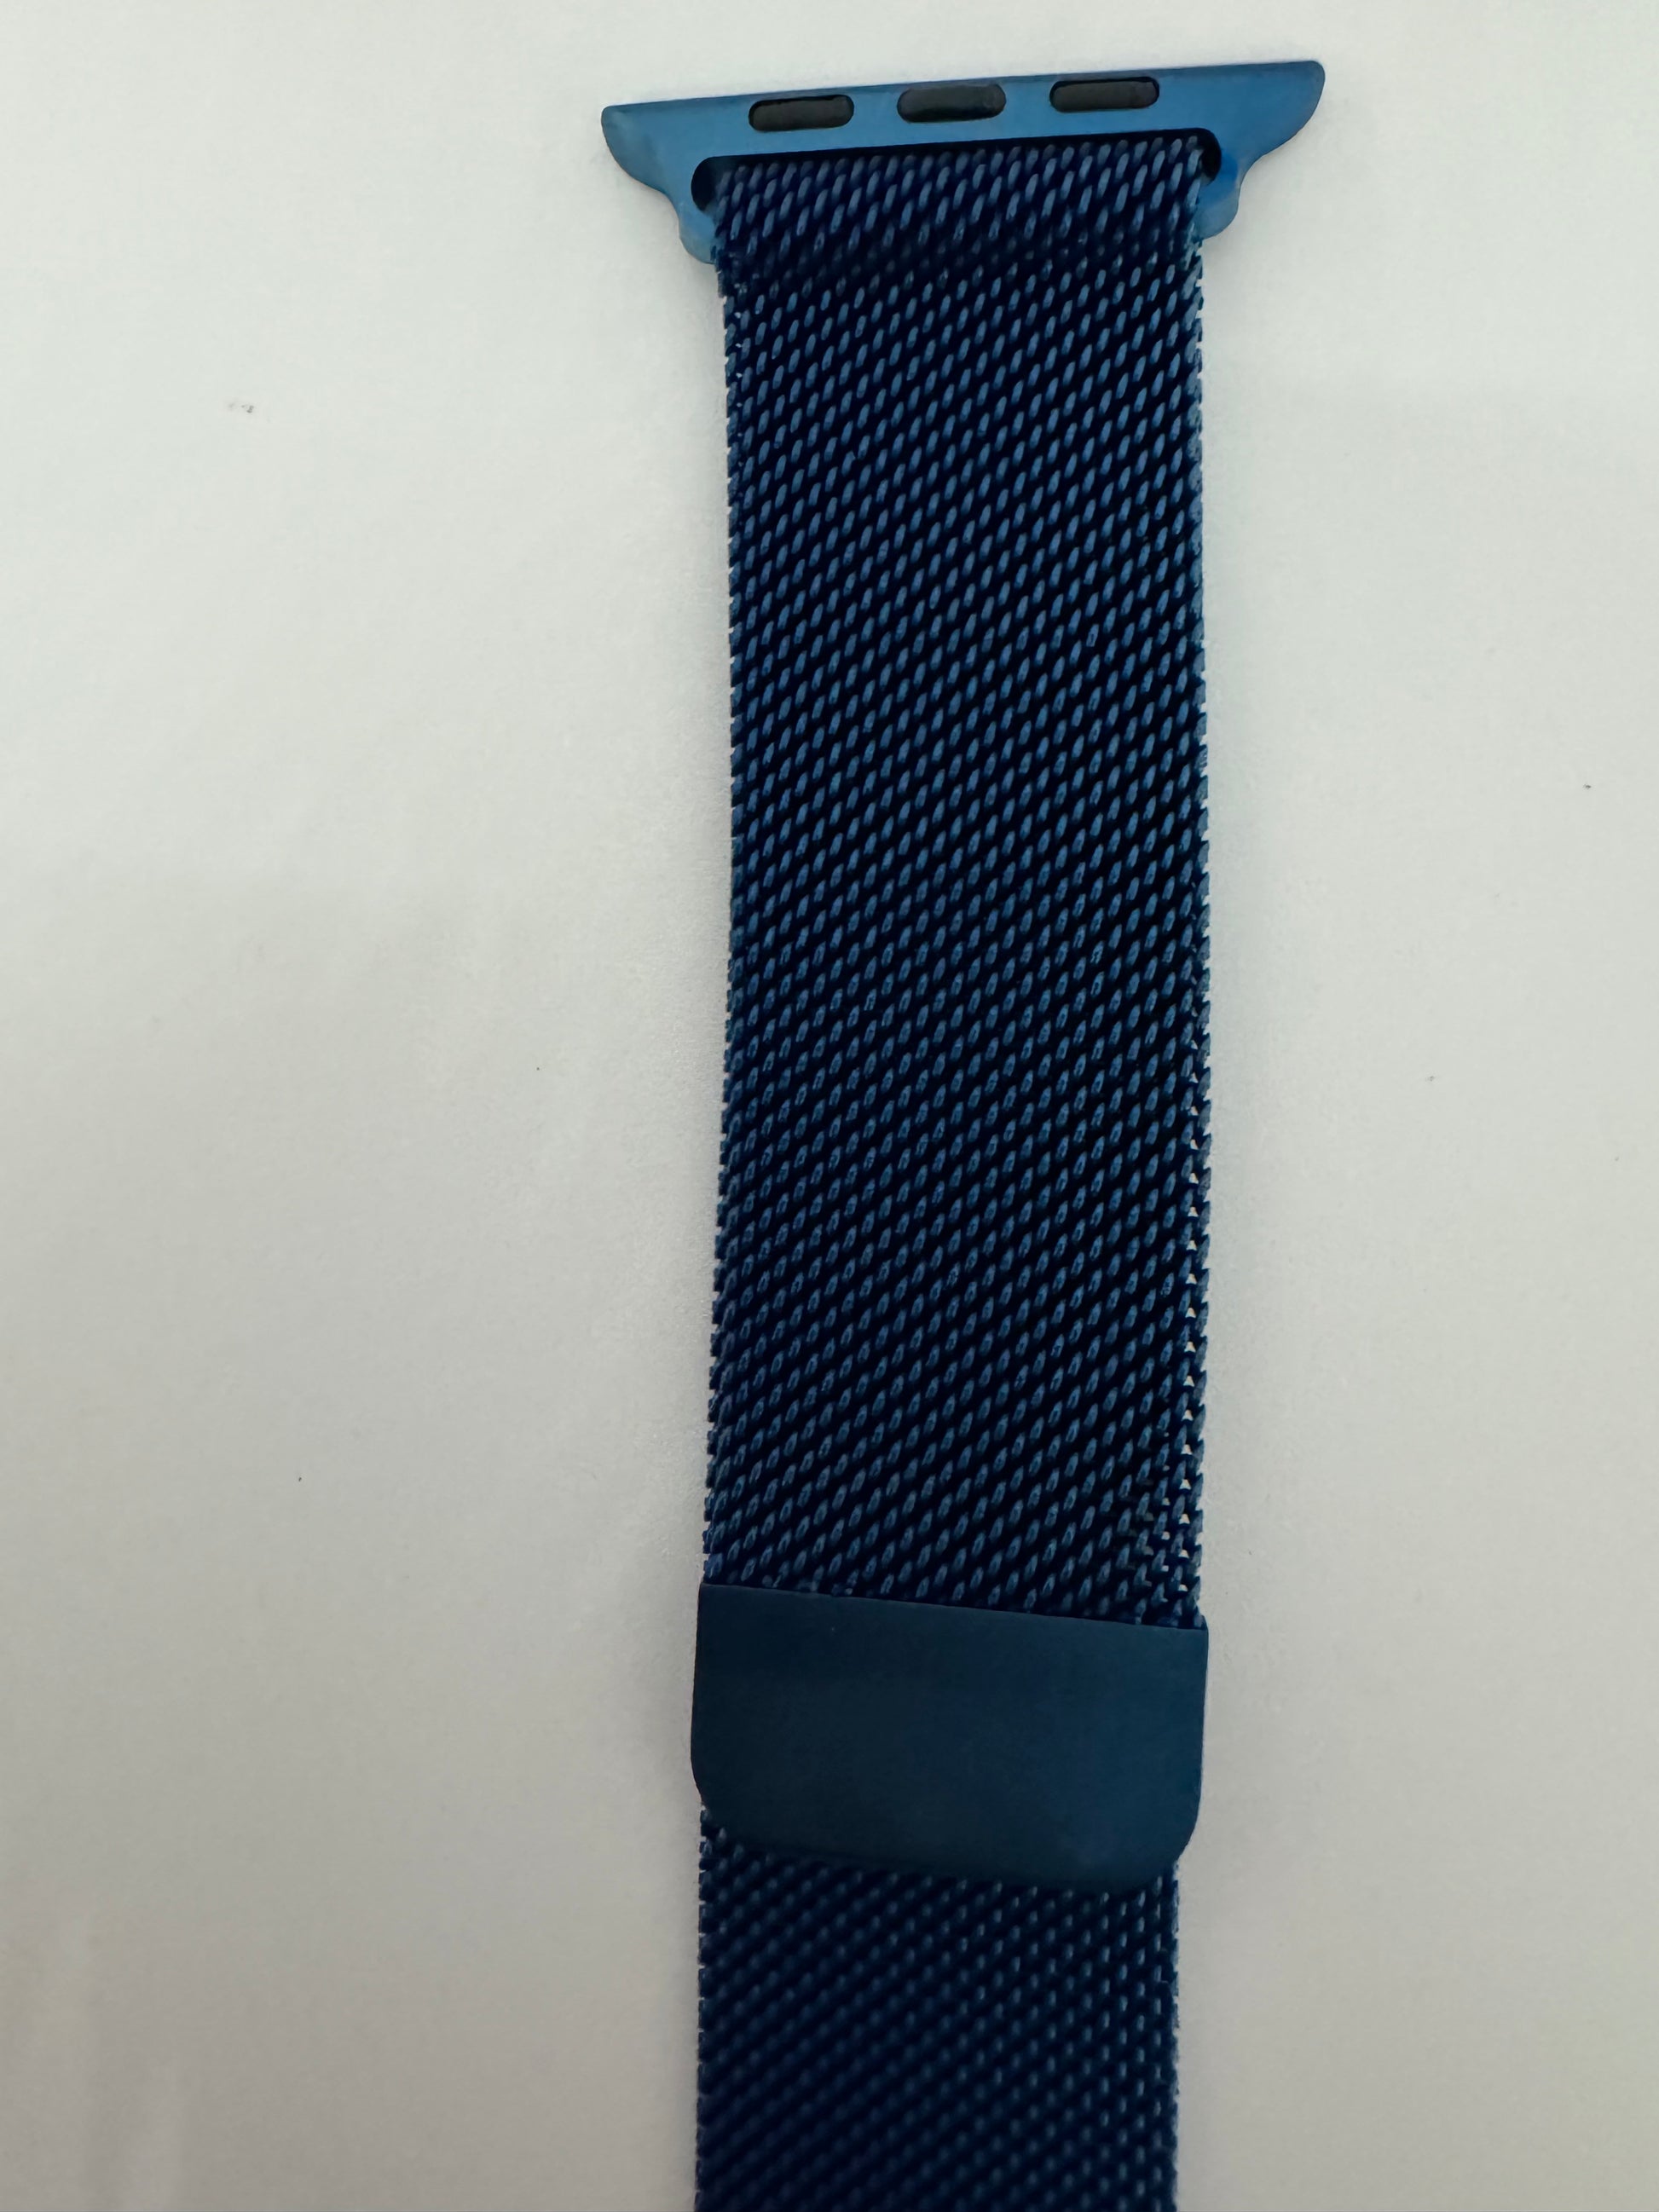 The picture shows a watch band. It is a woven band with a deep blue color. The texture appears to be a tight mesh pattern. At the top, there is a metallic attachment with a similar blue color that has three holes, presumably to attach it to a watch. At the bottom, there is a darker blue loop that is likely used to secure the end of the band. The background is plain white.